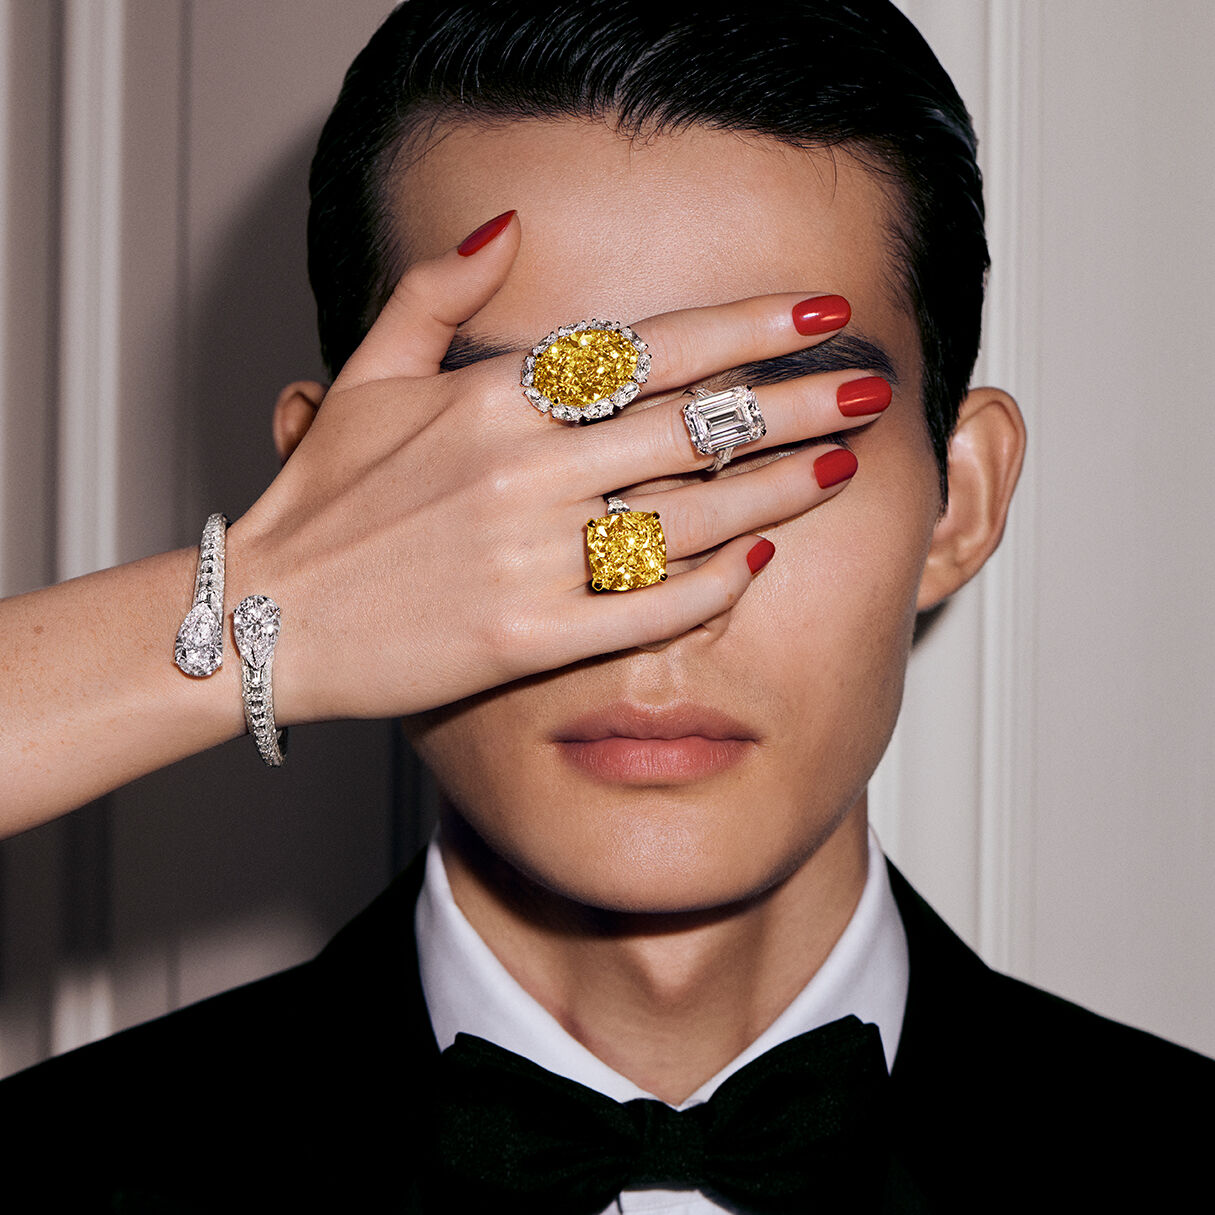 Graff Festive High Jewellery campaign image shows male model with female model hand wearing Graff High Jewellery rings and bracelet covering male models eyes